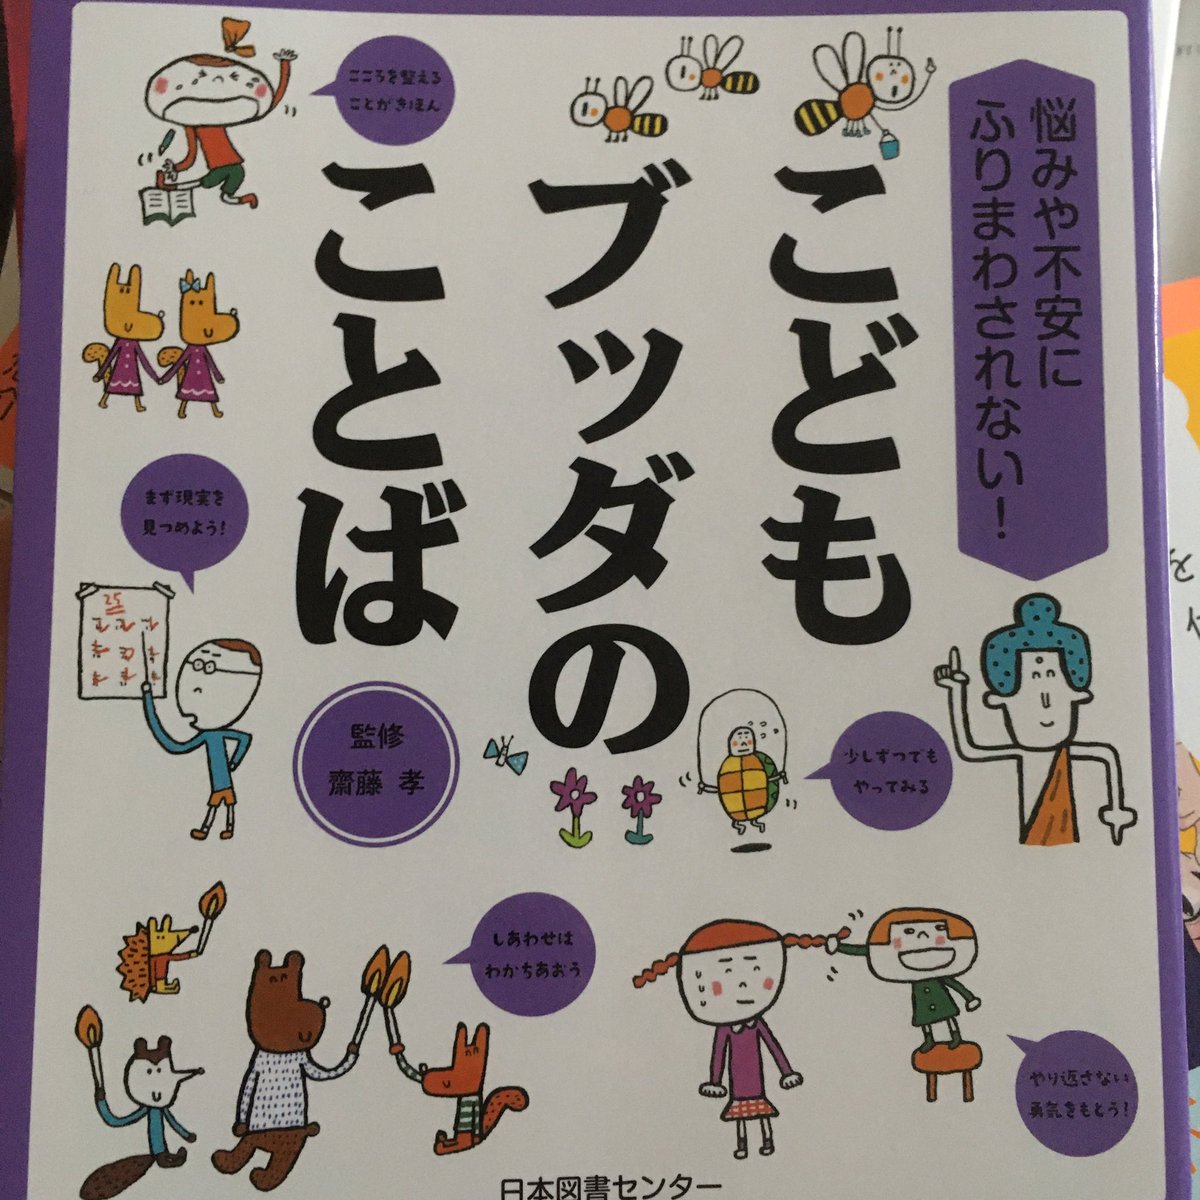 This book of Buddhist advice for kids! It seems amazing and practical. (I highly recommend reading nonfiction for kids.) Keiko Sugawara’s illustrations give it so much personality, too 